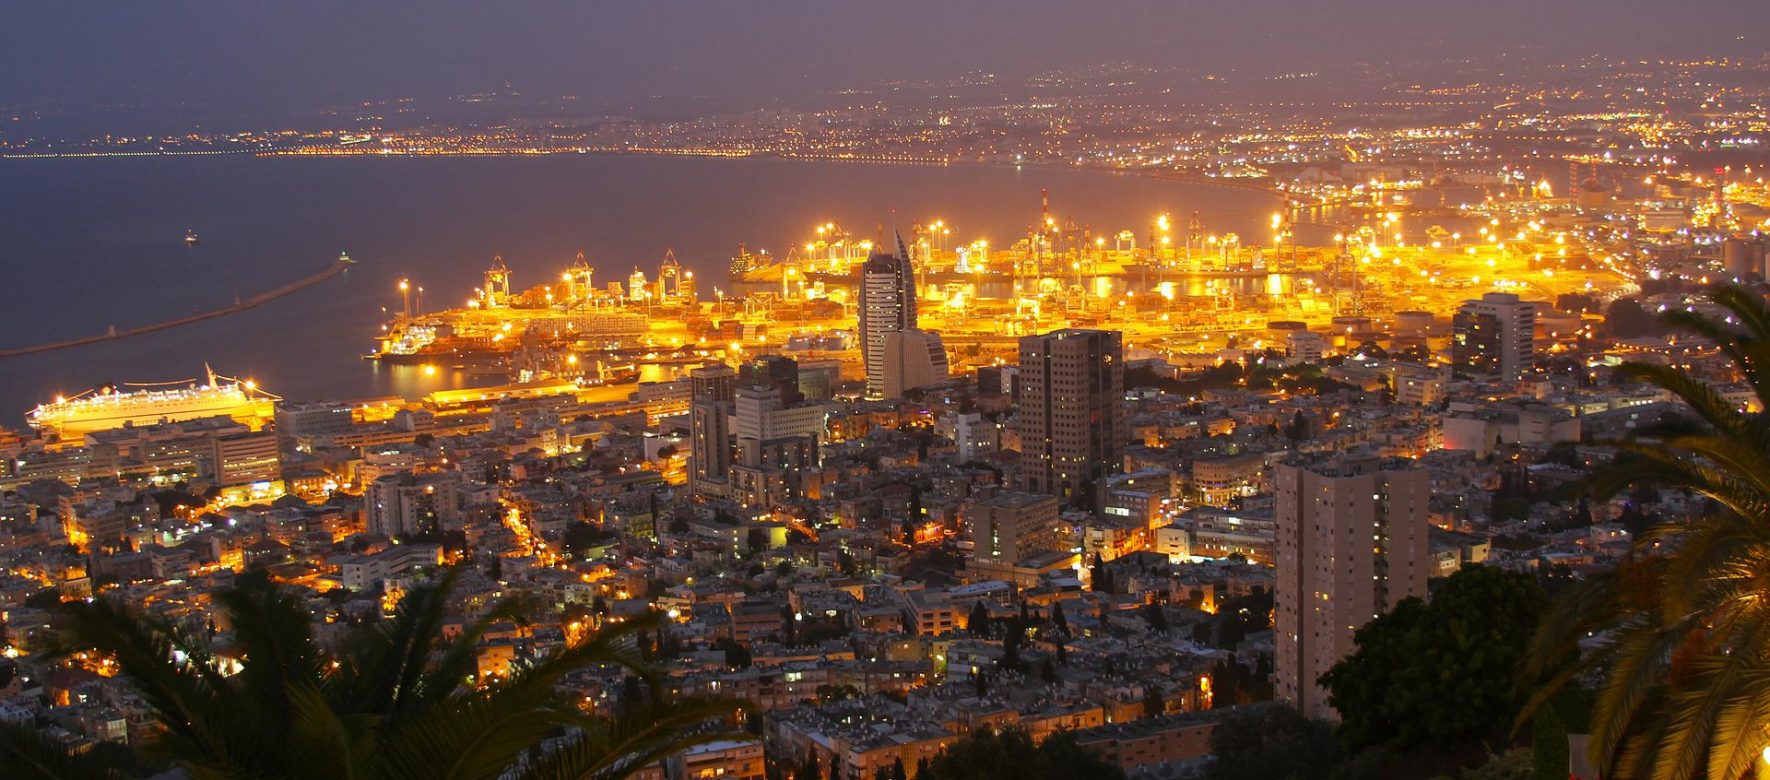 How will Palestine be able to meet the growing demand for electricity from its population?